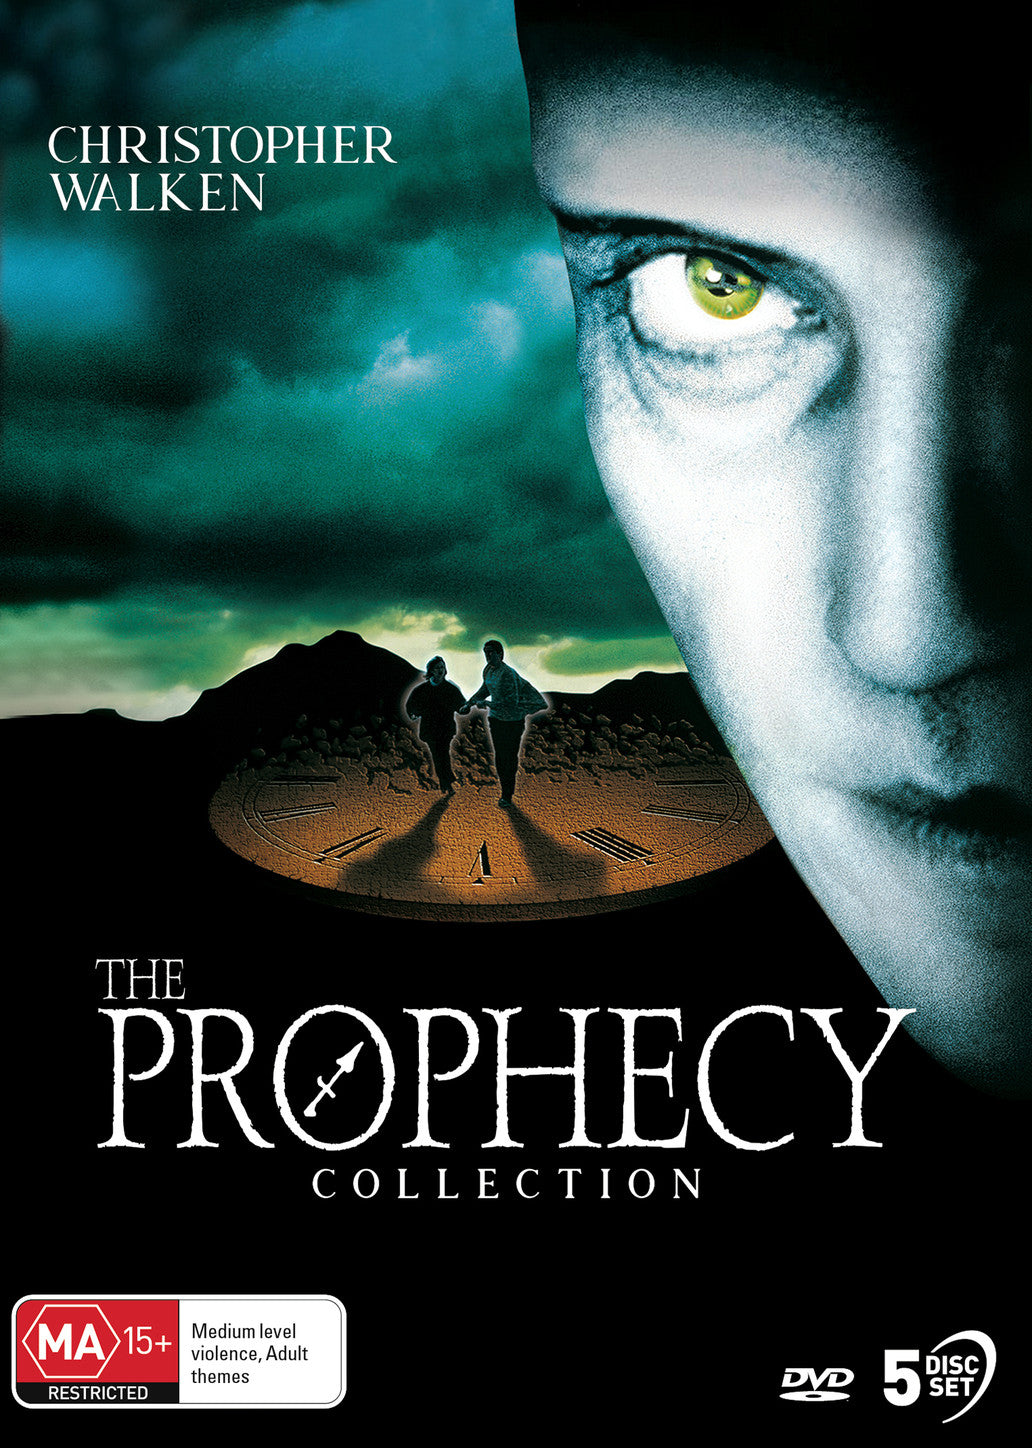 THE PROPHECY COLLECTION - DVD (THE PROPHECY, THE PROPHECY II, THE PROPHECY III: THE ASCENT, THE PROPHECY IV: THE UPRISING, THE PROPHECY V: FORSAKEN)